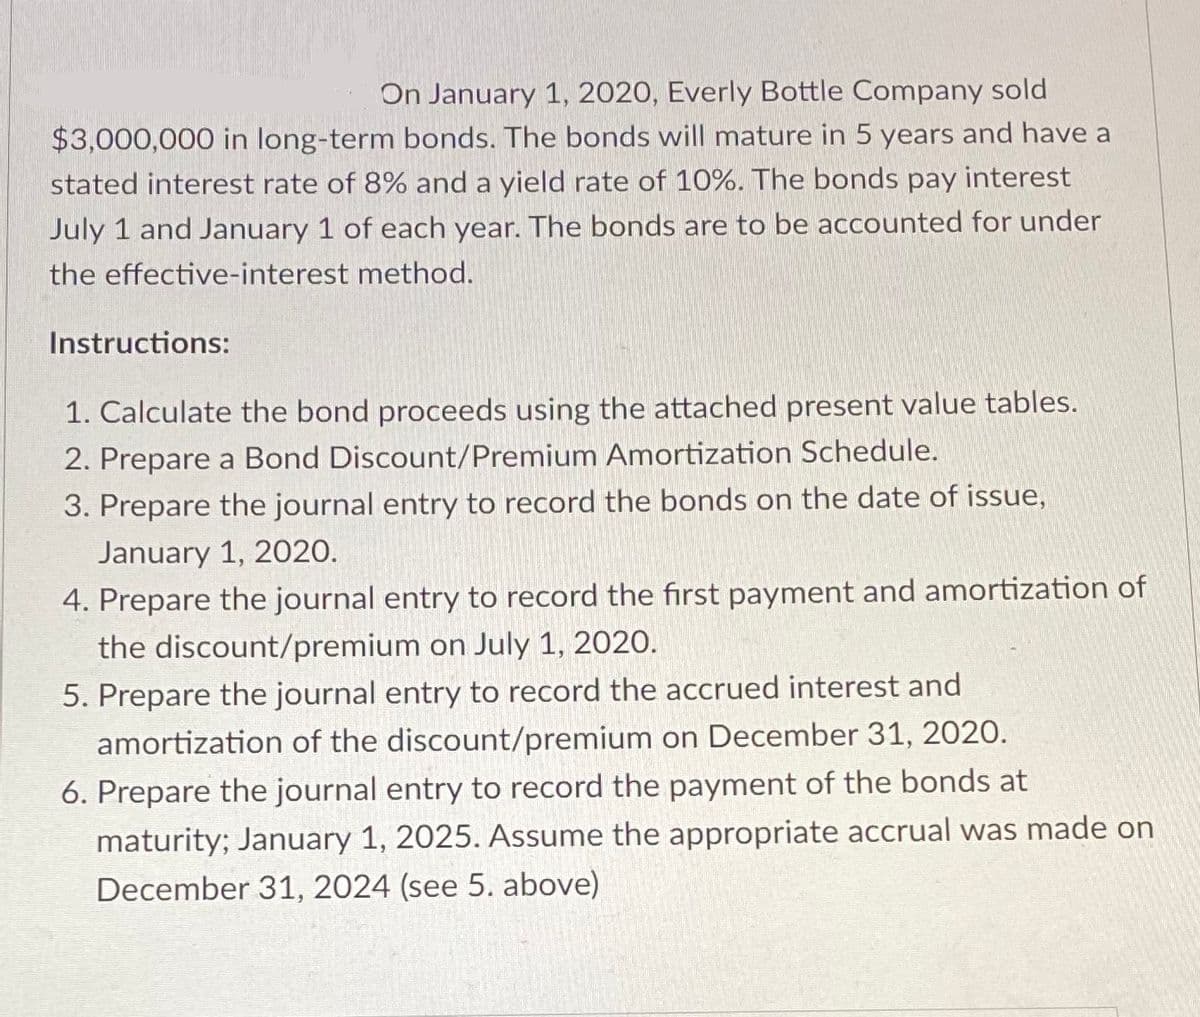 On January 1, 2020, Everly Bottle Company sold
$3,000,000 in long-term bonds. The bonds will mature in 5 years and have a
stated interest rate of 8% and a yield rate of 10%. The bonds pay interest
July 1 and January 1 of each year. The bonds are to be accounted for under
the effective-interest method.
Instructions:
1. Calculate the bond proceeds using the attached present value tables.
2. Prepare a Bond Discount/Premium Amortization Schedule.
3. Prepare the journal entry to record the bonds on the date of issue,
January 1, 2020.
4. Prepare the journal entry to record the first payment and amortization of
the discount/premium on July 1, 2020.
5. Prepare the journal entry to record the accrued interest and
amortization of the discount/premium on December 31, 2020.
6. Prepare the journal entry to record the payment of the bonds at
maturity; January 1, 2025. Assume the appropriate accrual was made on
December 31, 2024 (see 5. above)